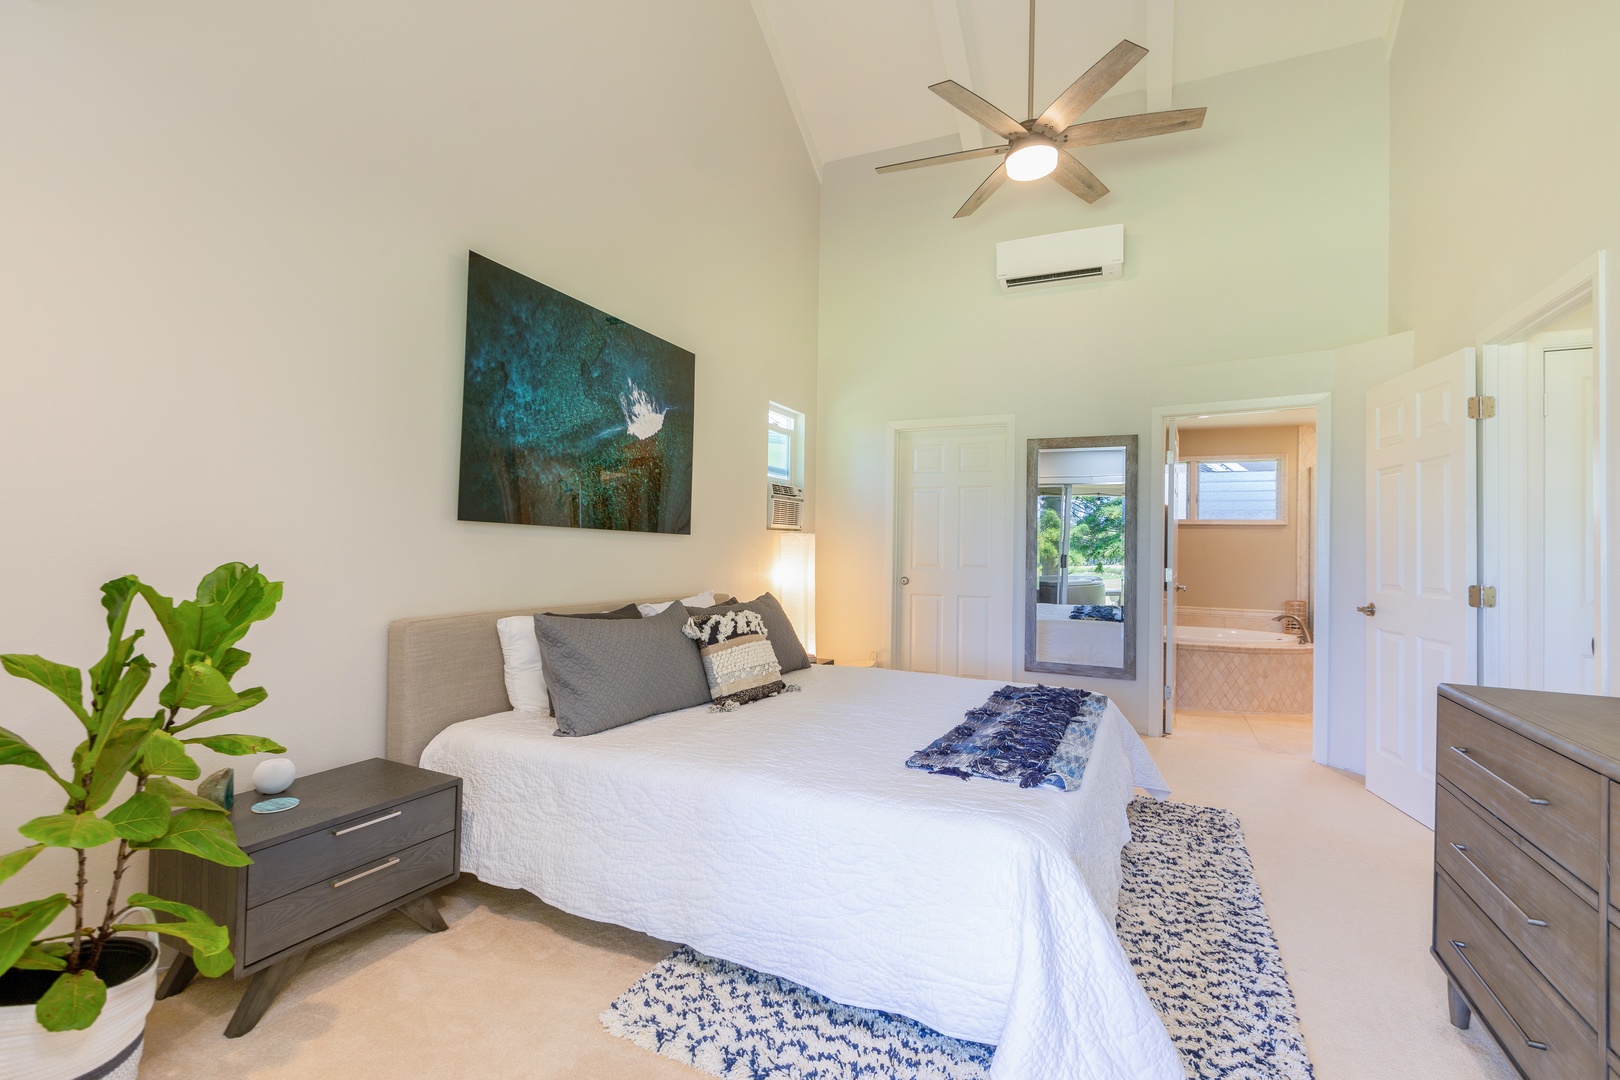 Princeville Vacation Rentals, Wai Puna - Primary bedroom with king, golf views, lanai access, and ensuite bathroom